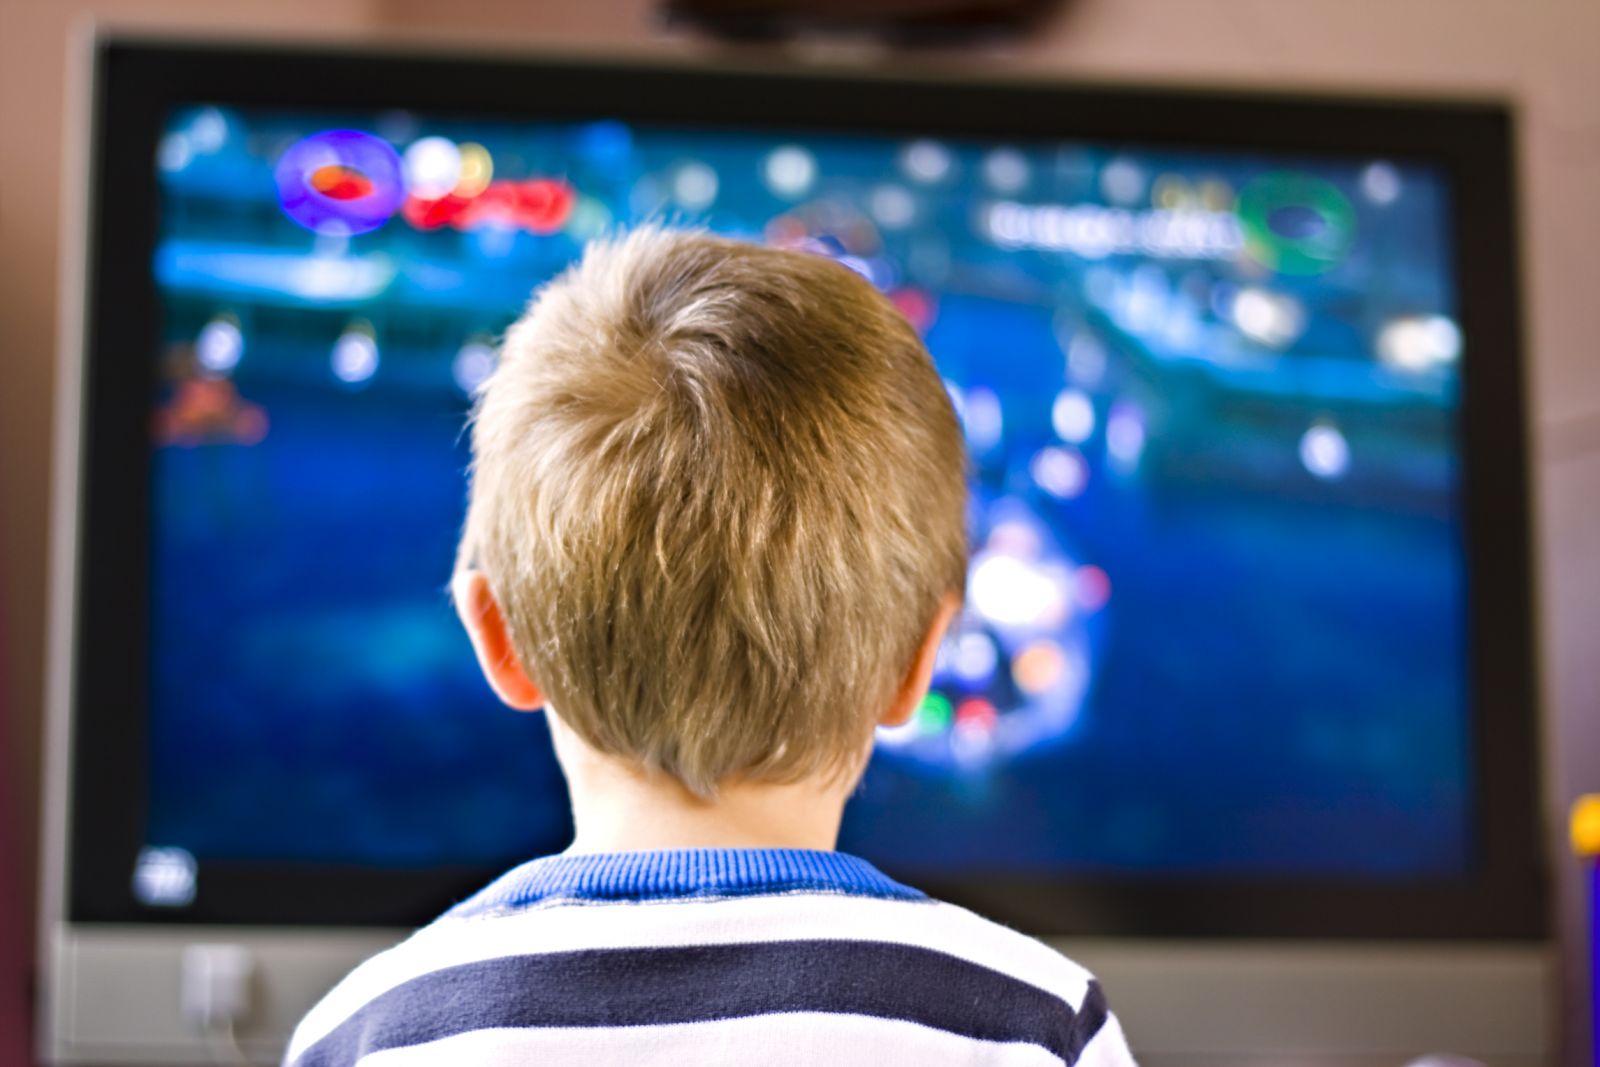 A child watching television.